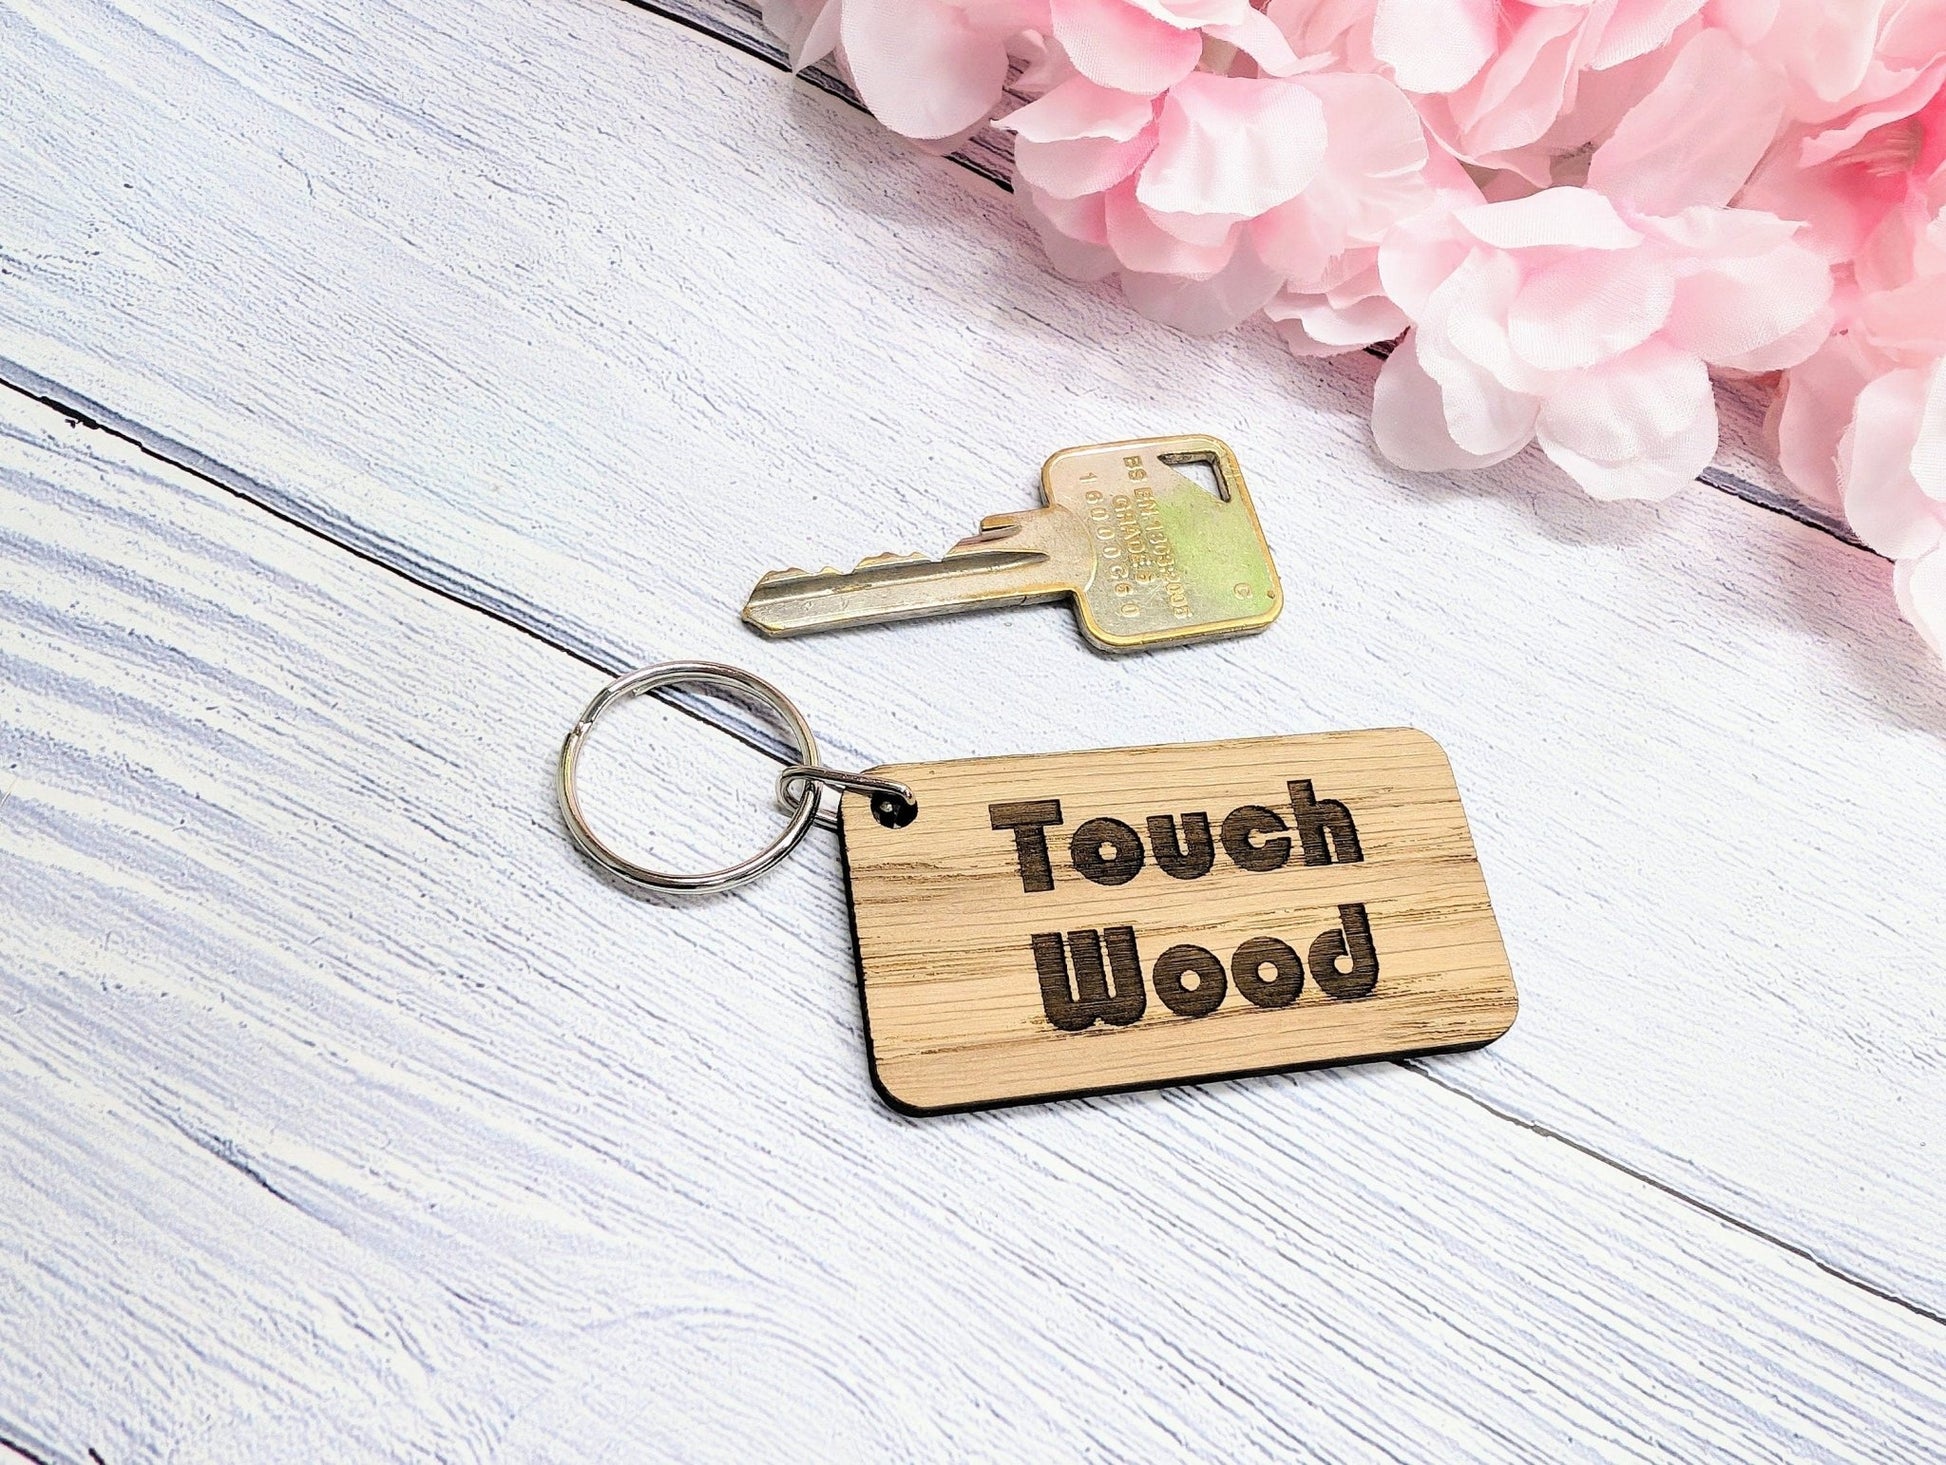 Touch Wood Oak Veneer Keyring - 65x35mm, Superstition Gift | Crafted in Wales, Unique Keepsake, Perfect for Superstitious Folk, Eco-Friendly - CherryGroveCraft